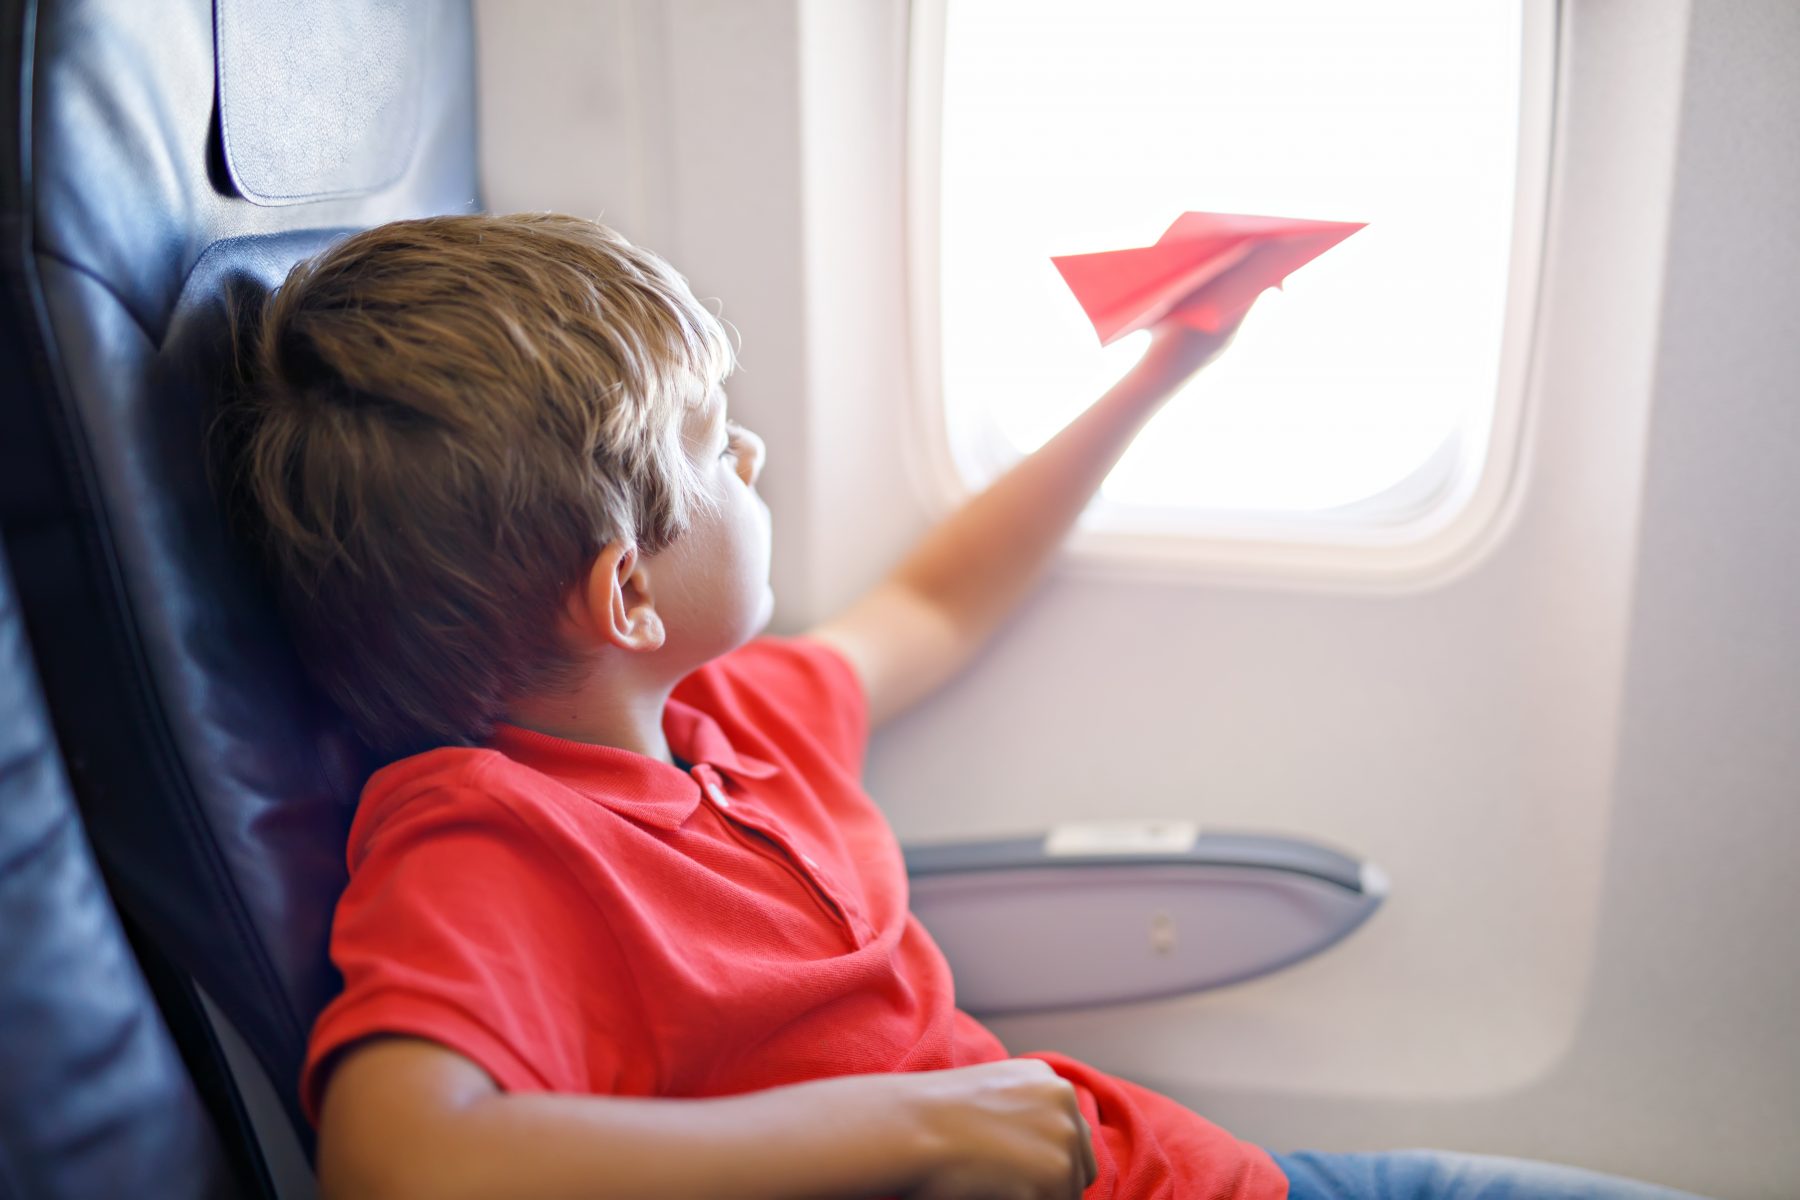 southwest airlines child travel alone policy